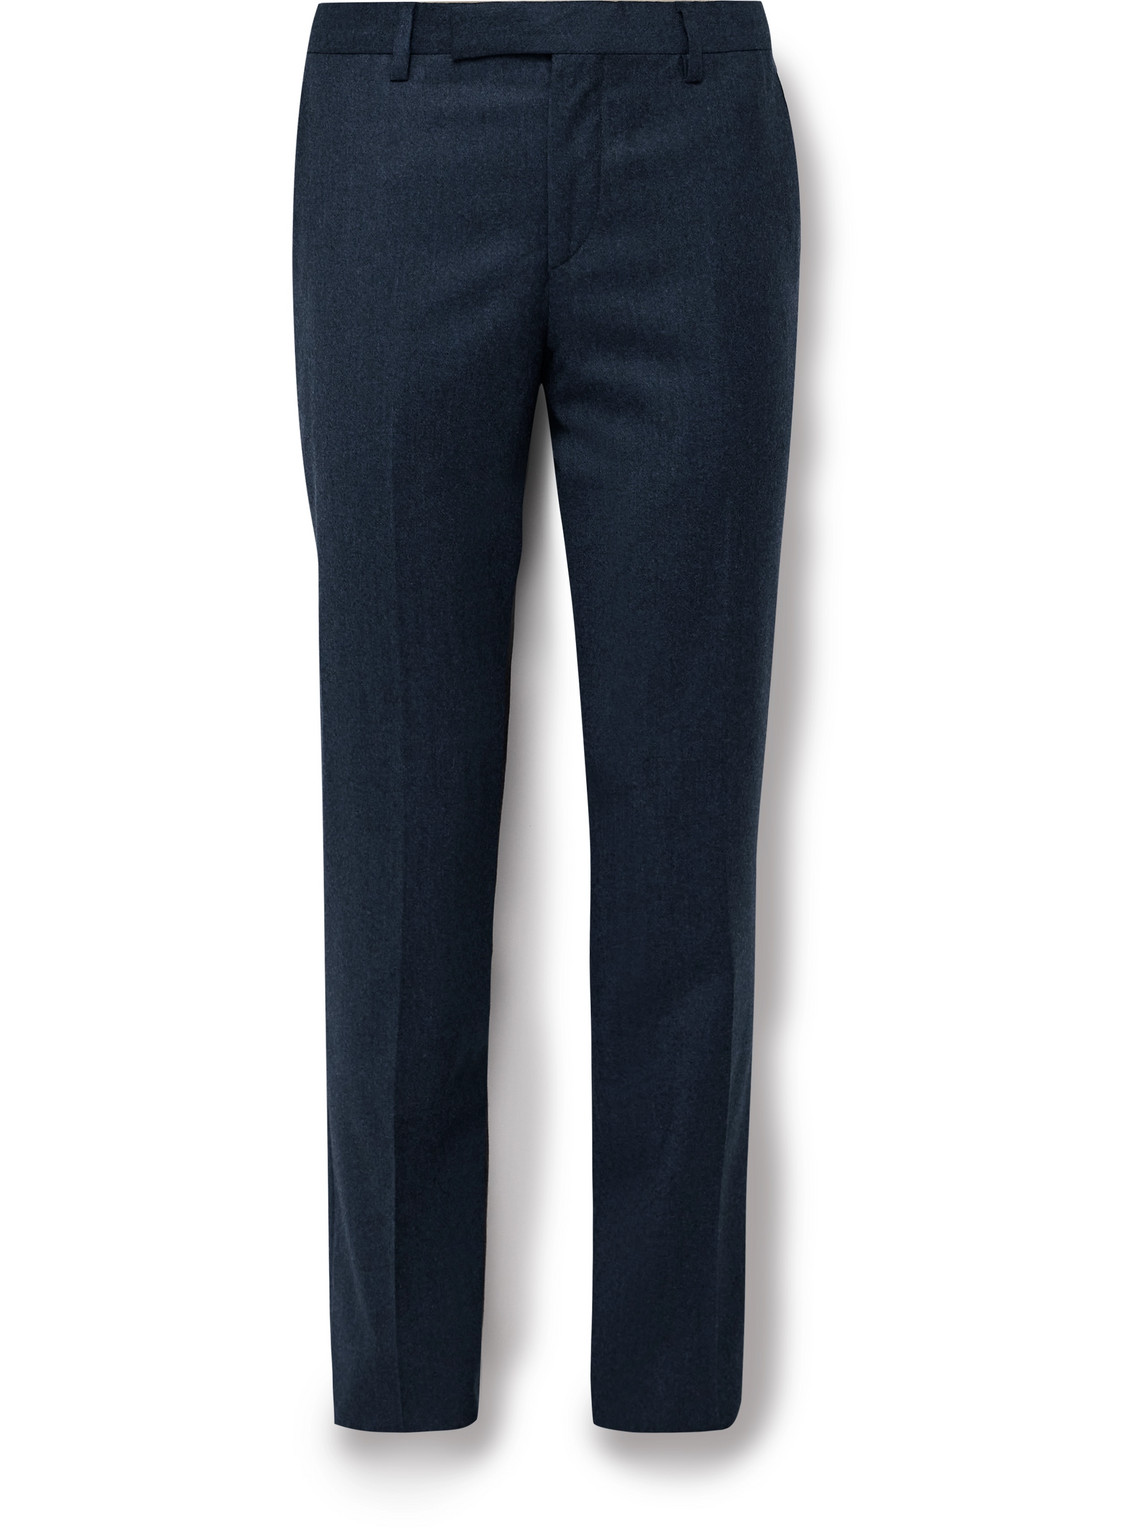 Paul Smith - Slim-Fit Wool and Cashmere-Blend Flannel Suit Trousers - Men - Blue - UK/US 34 von Paul Smith